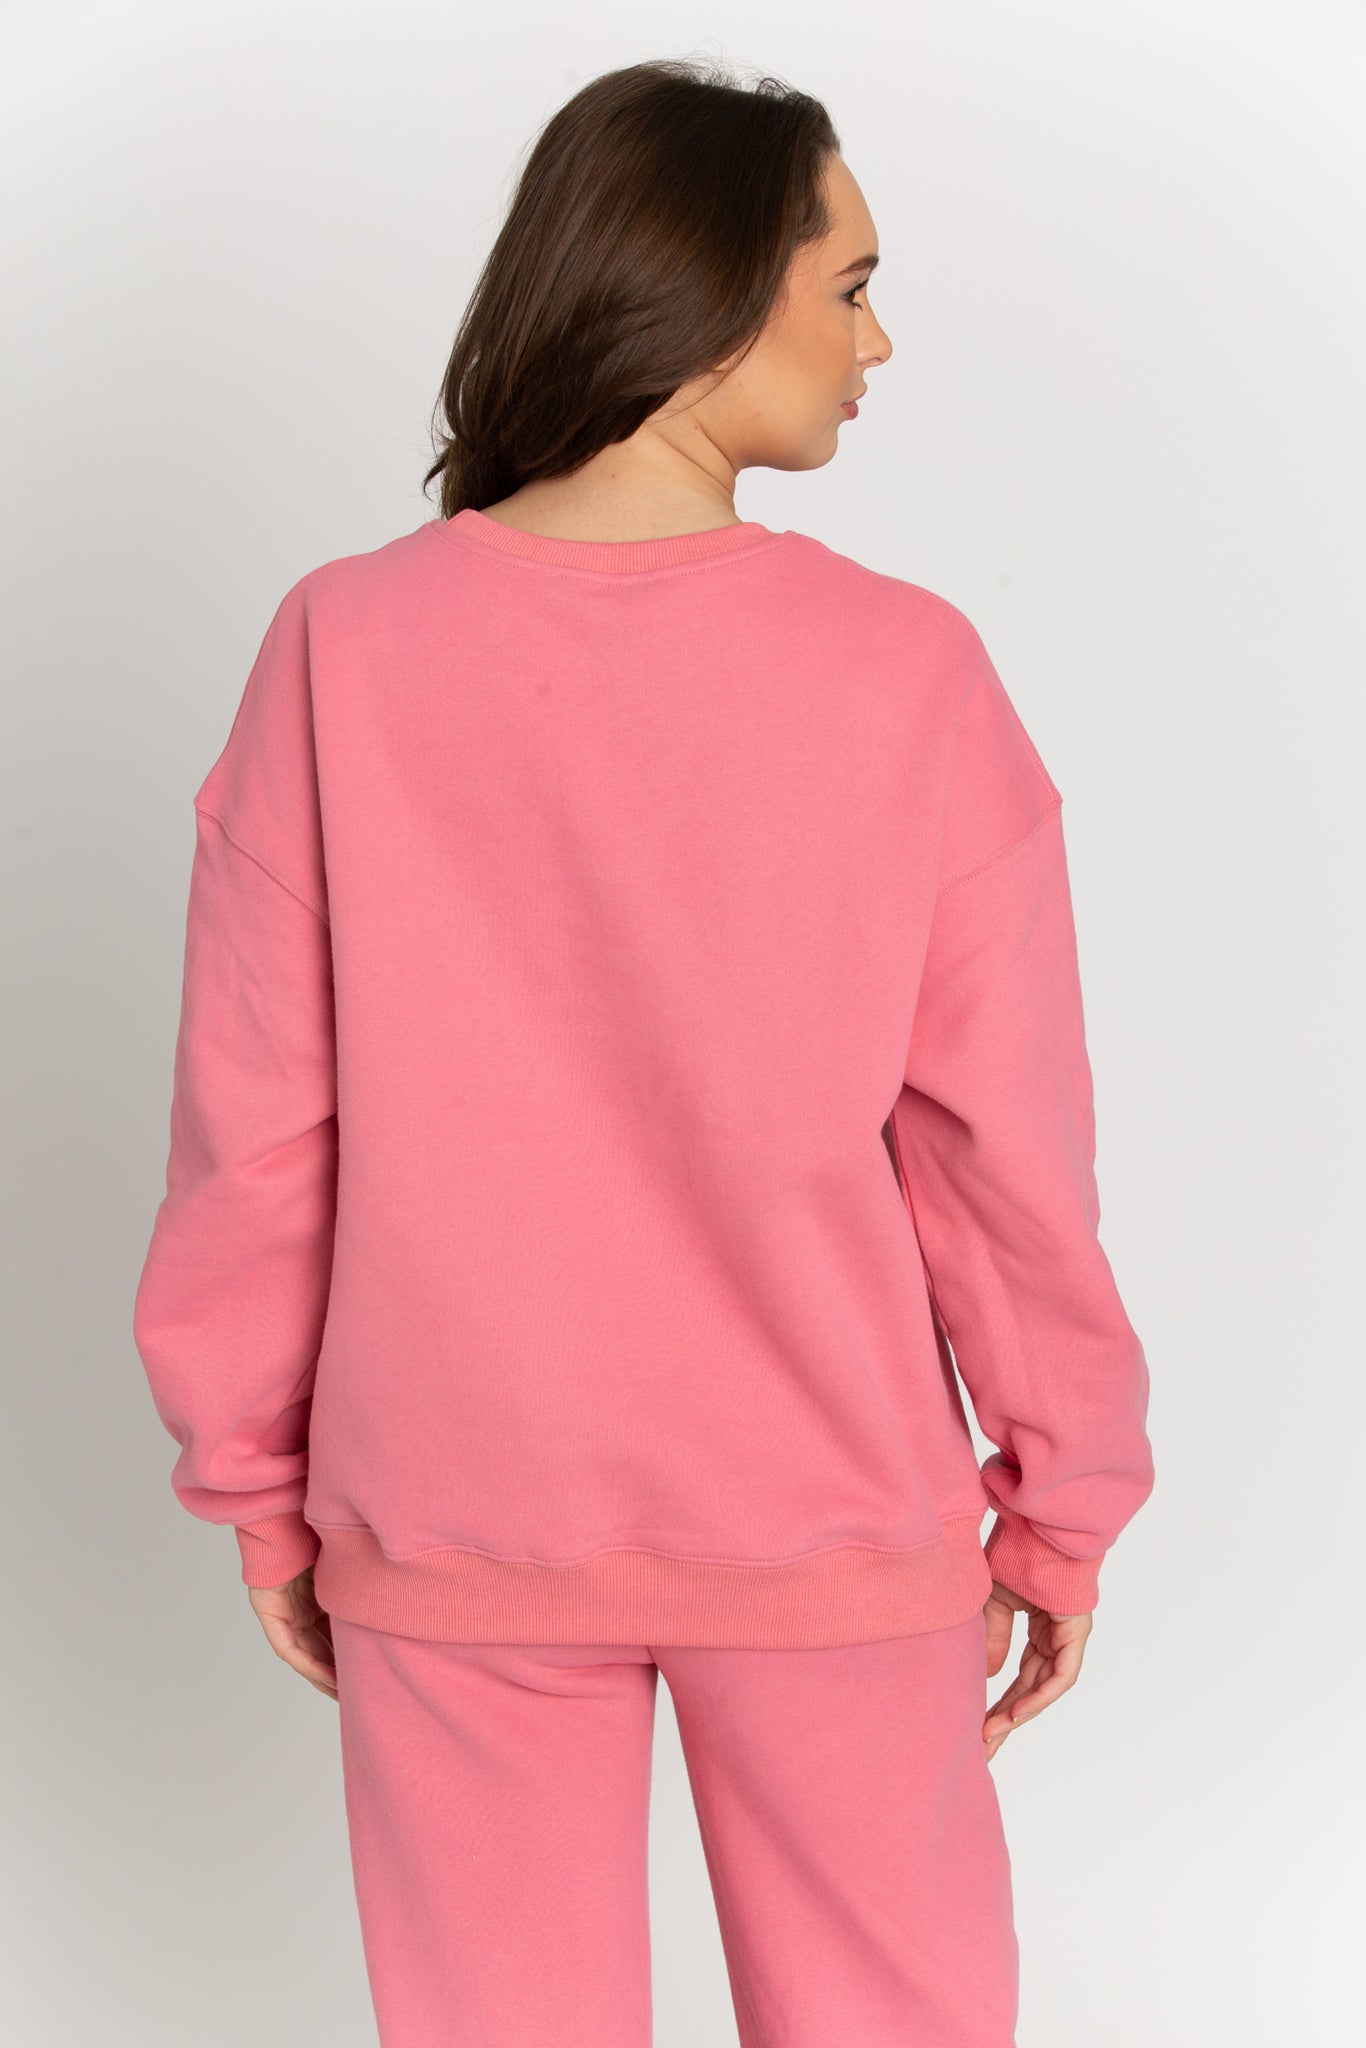 Upgrade your wardrobe with this Rouge GH Sport Sweatshirt. Featuring a fuzzy 3D lettering design, this classic piece can be layered with a bold jacket and beanie for colder weather, or be paired with a tennis skirt for a more casual look.